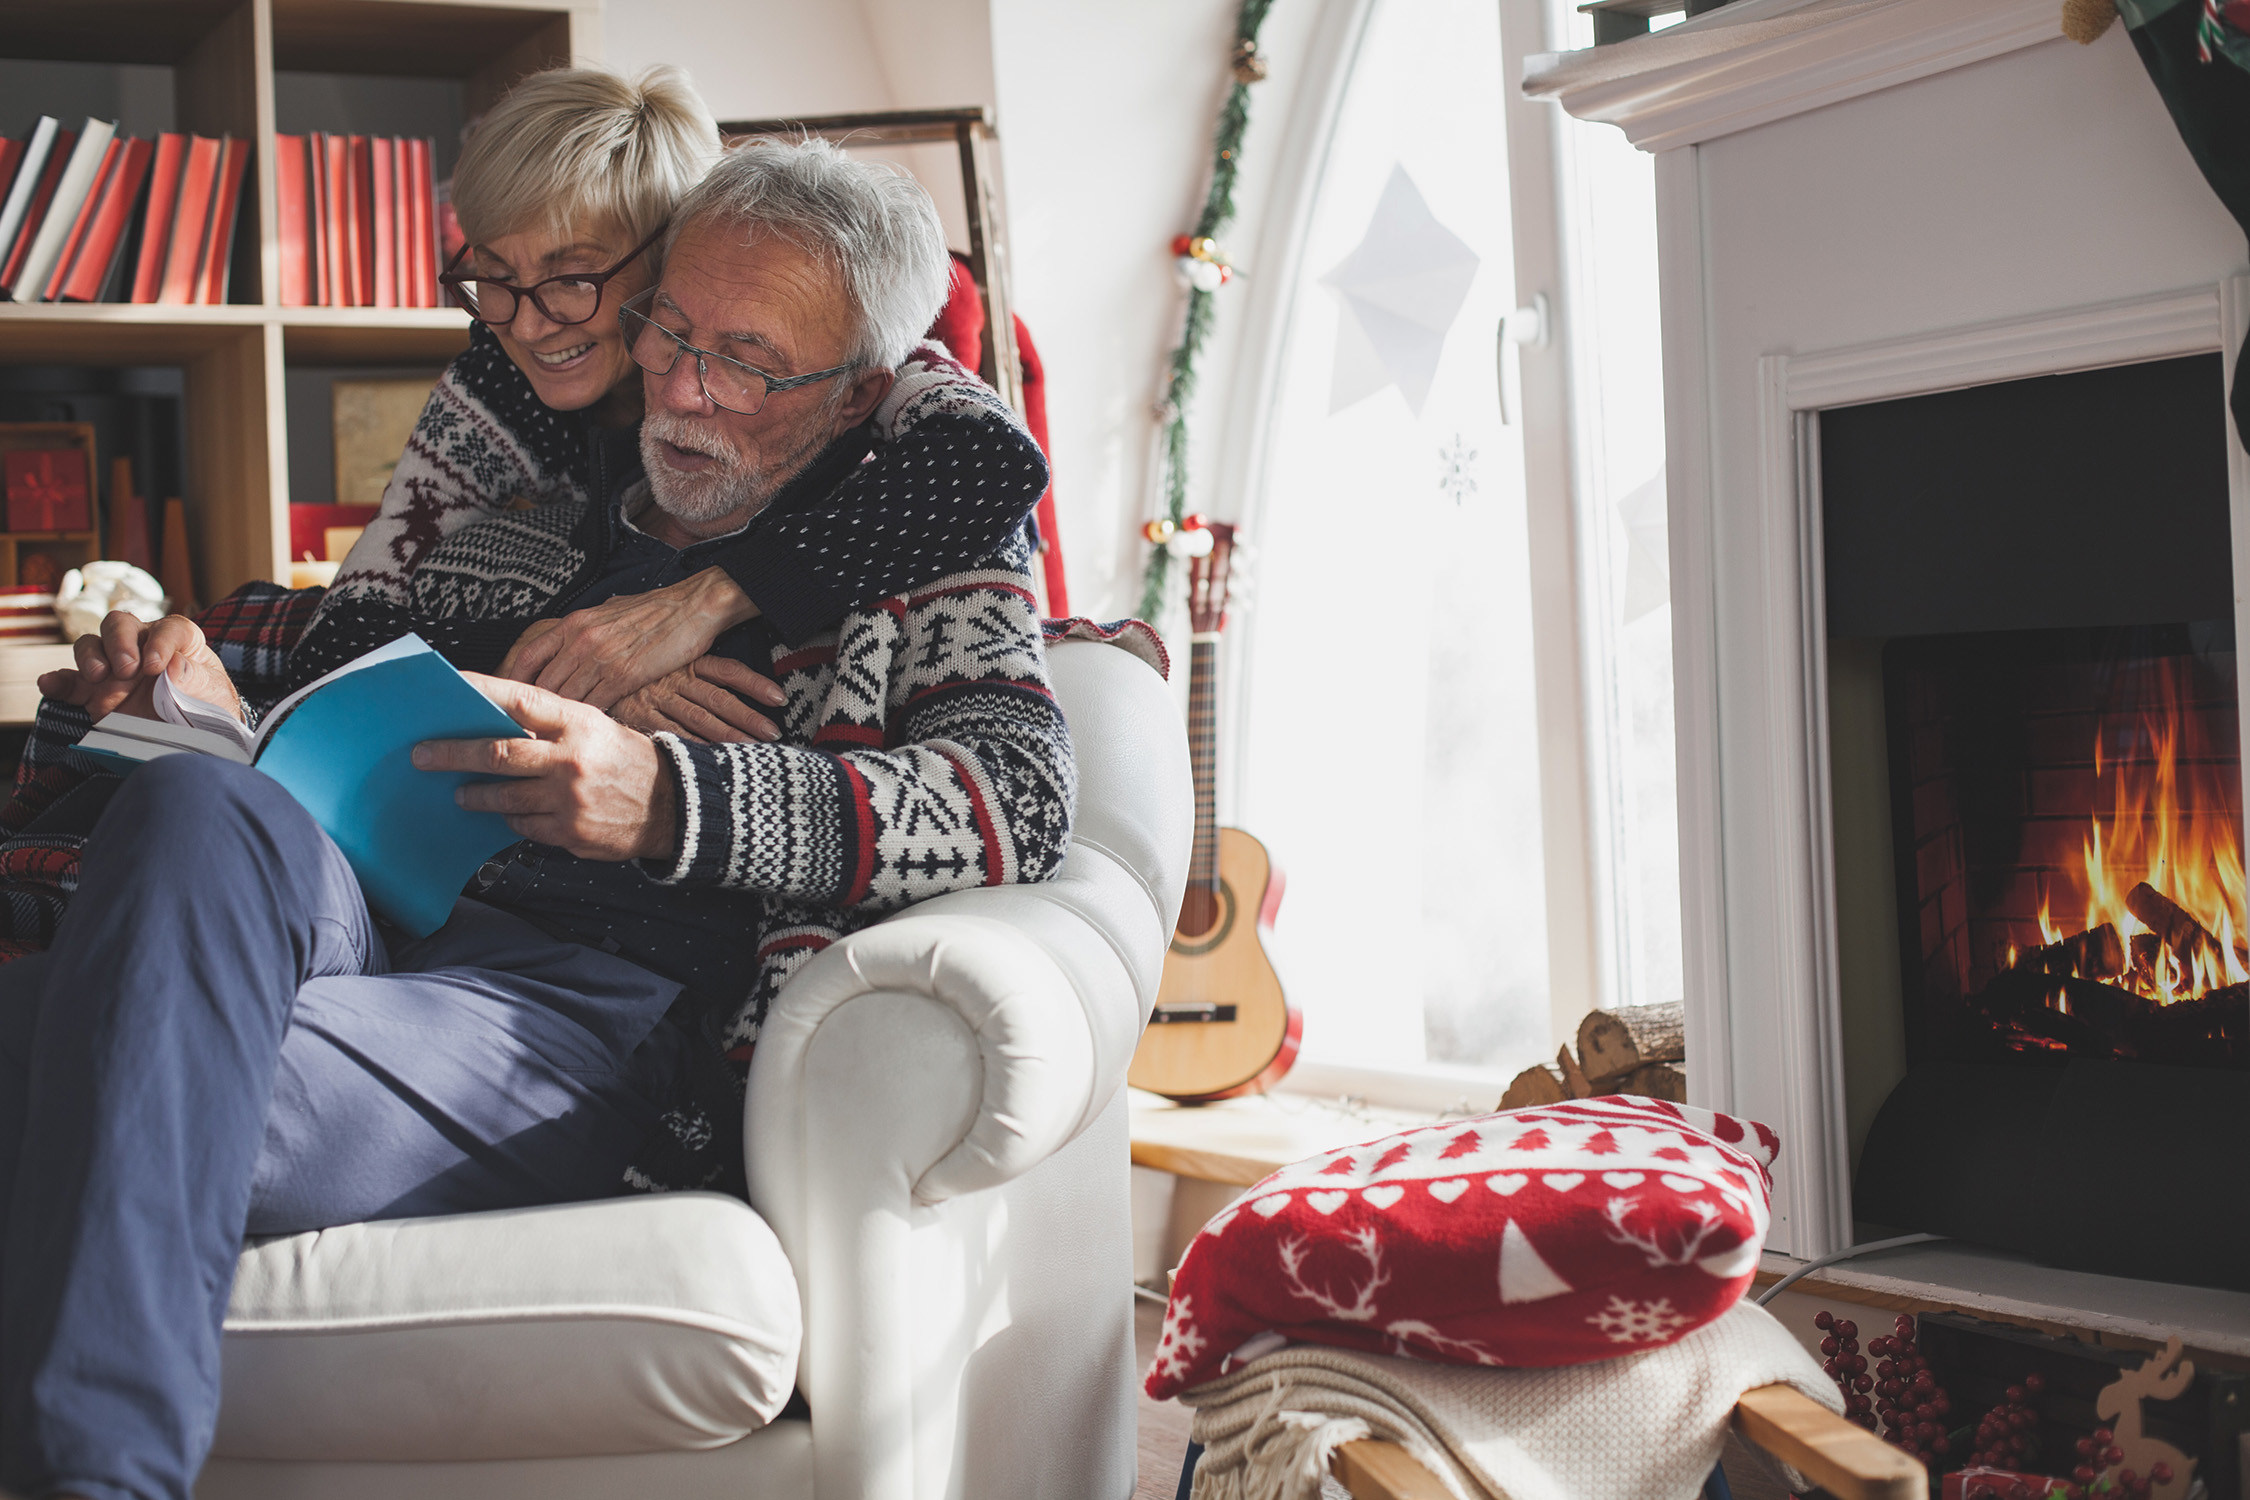 5 Heart Health Tips for the Holidays